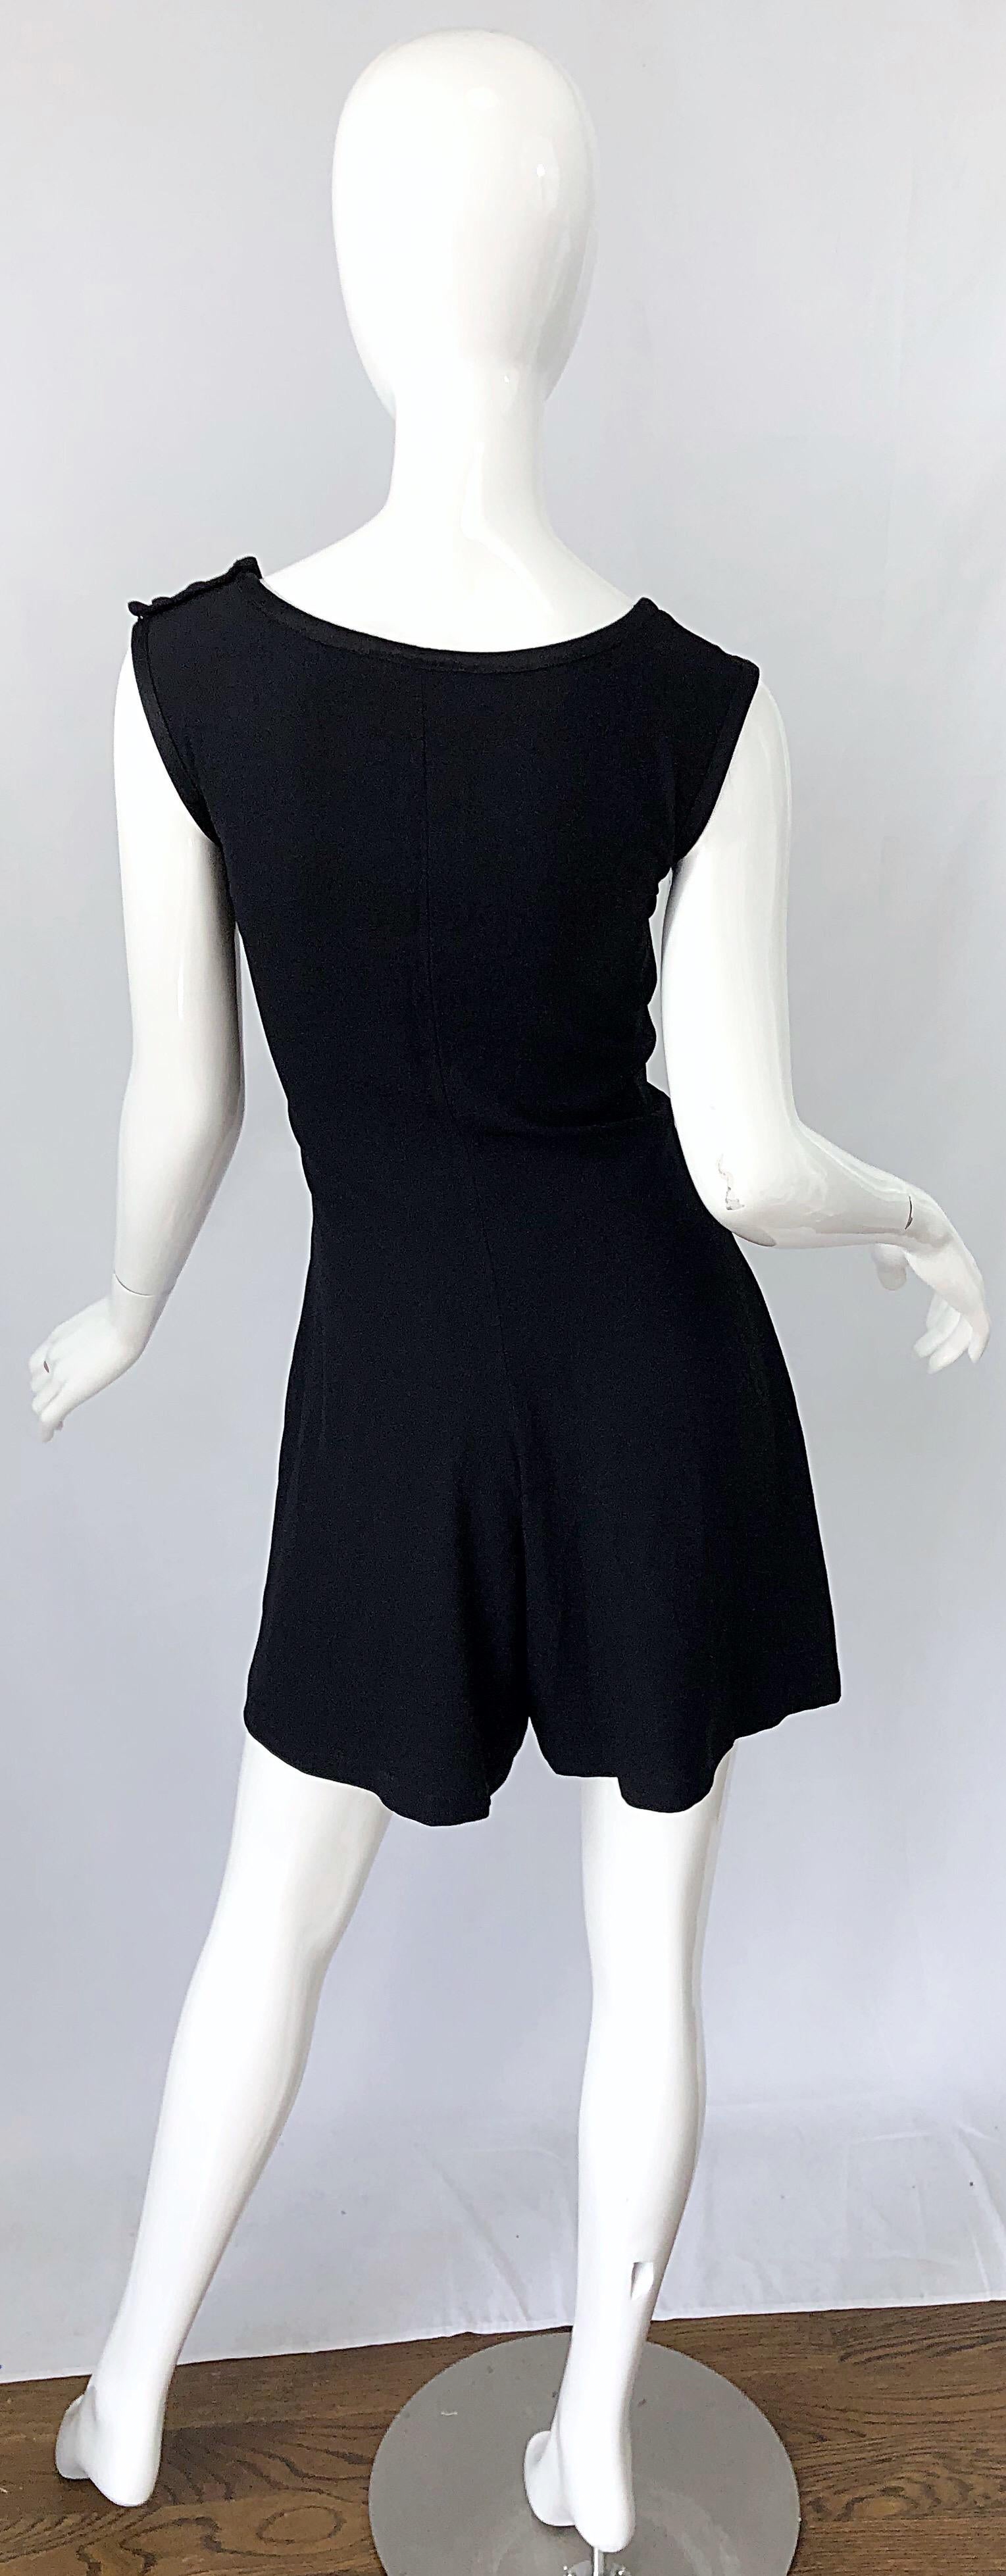  Vintage Yves Saint Laurent Romper Black Rayon Sleeveless 1990s One Piece 90s  In Excellent Condition For Sale In San Diego, CA